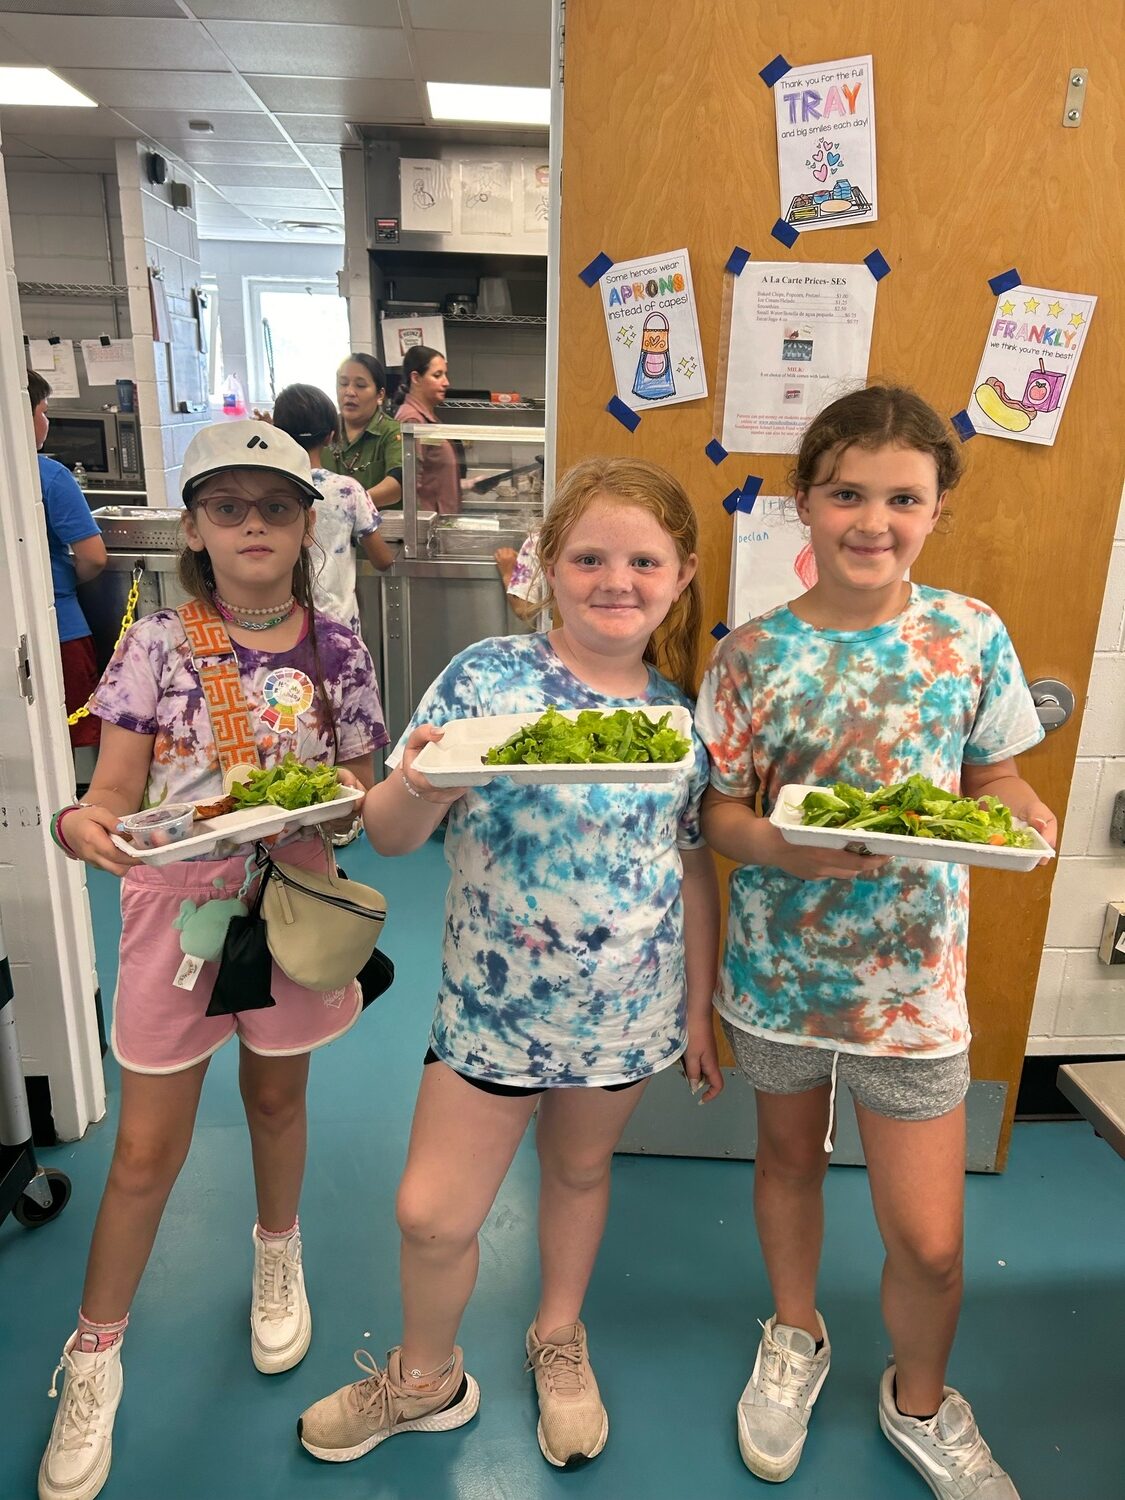 Southampton Elementary School Gardening Club members recently hosted their first farm-to-table lunch at their school. For the lunch, the students planted and cared for lettuce seeds in their school’s indoor tower garden and outdoor garden. Their harvest was served for lunch with the assistance of kitchen staff, who washed and prepped the lettuce. COURTESY SOUTHAMPTON SCHOOL DISTRICT